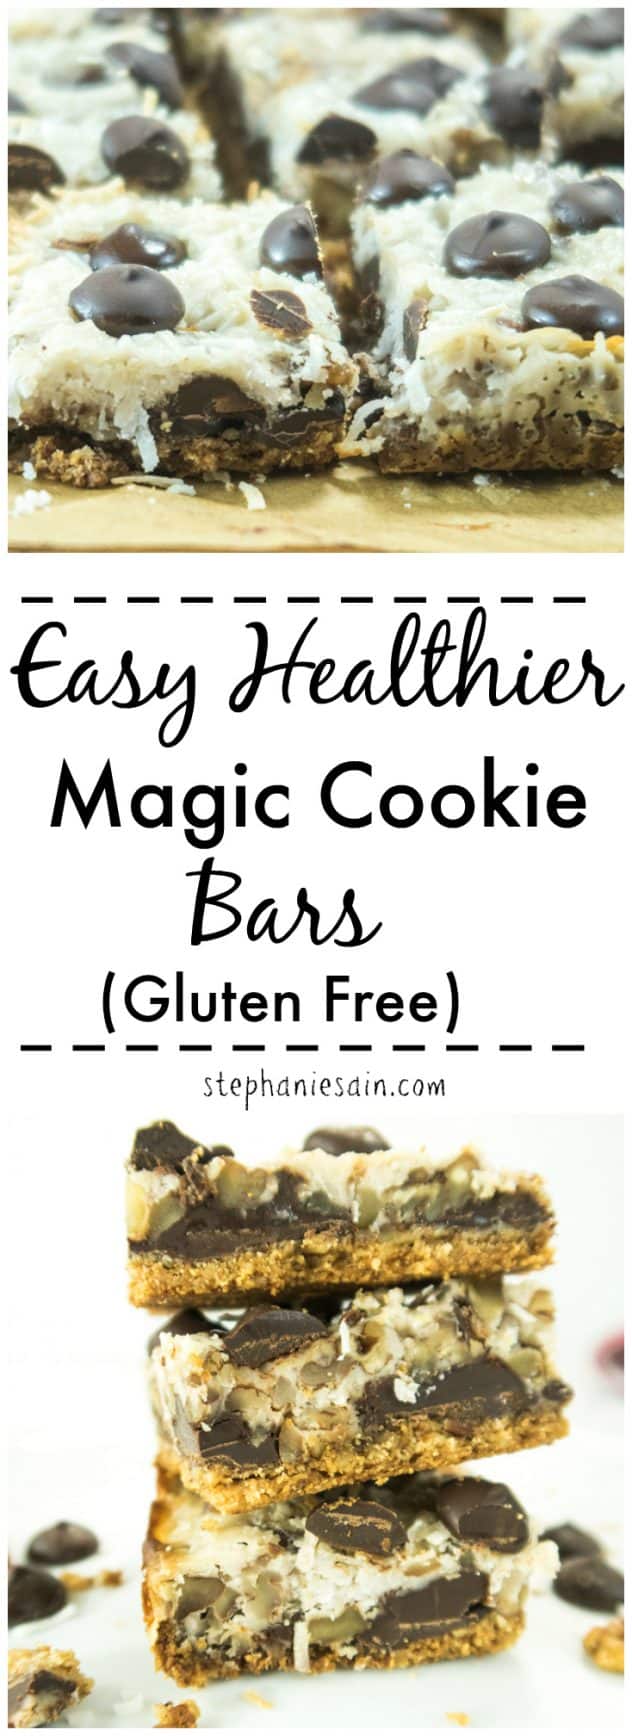 Easy Healthier Magic Cookie Bars are a healthier, lightened up version of an age old favorite. Made without added refined sugars, Vegan & Paleo friendly.